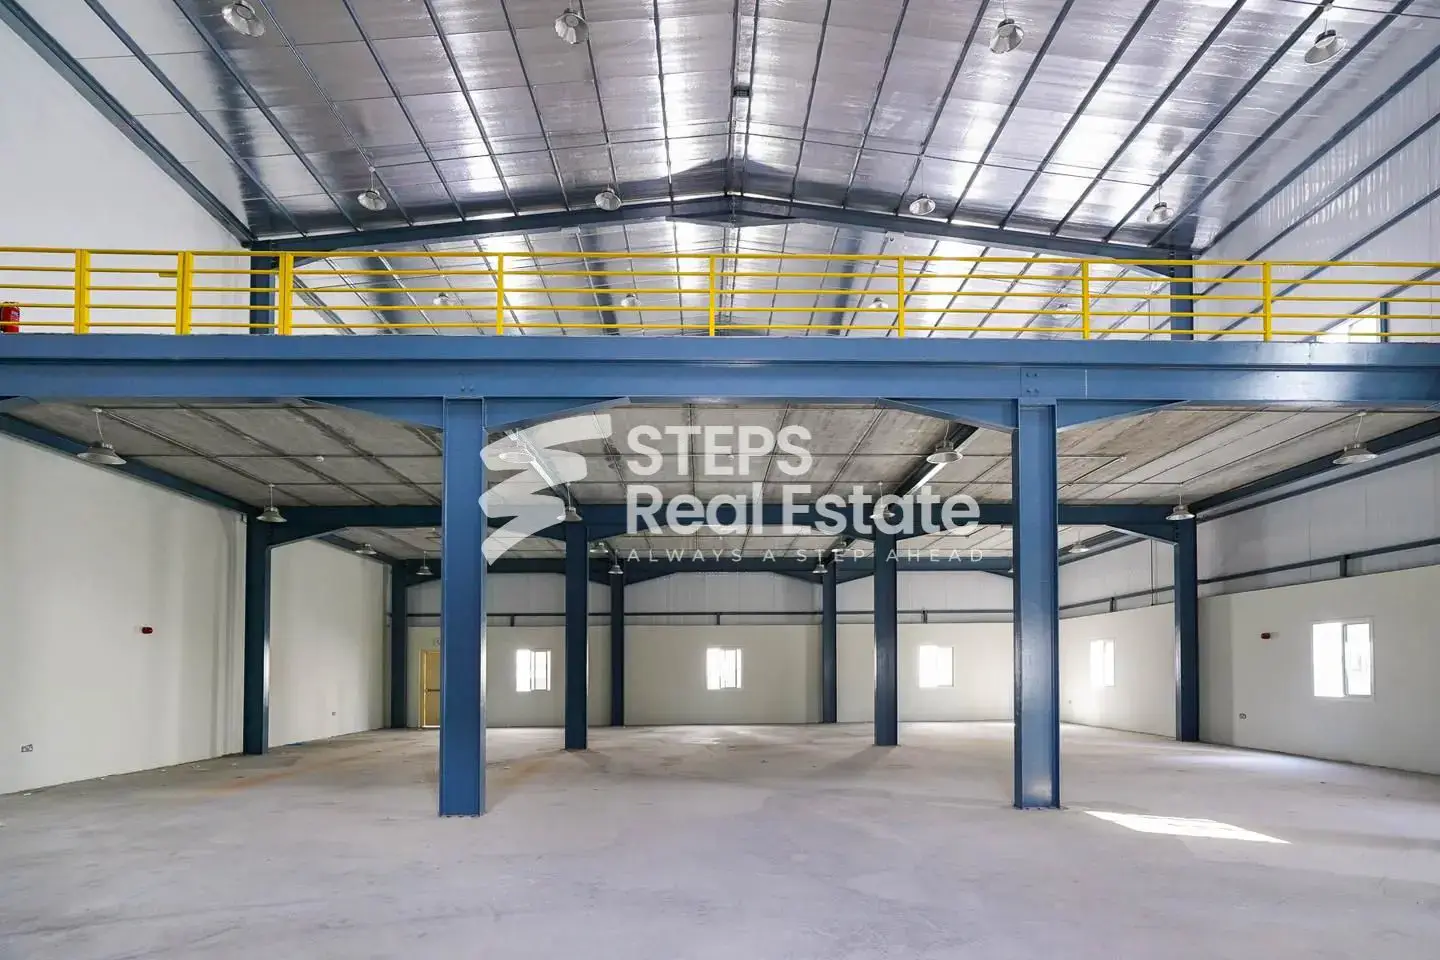 1000-SQM Licensed Warehouse w/ Office, Showroom & Rooms